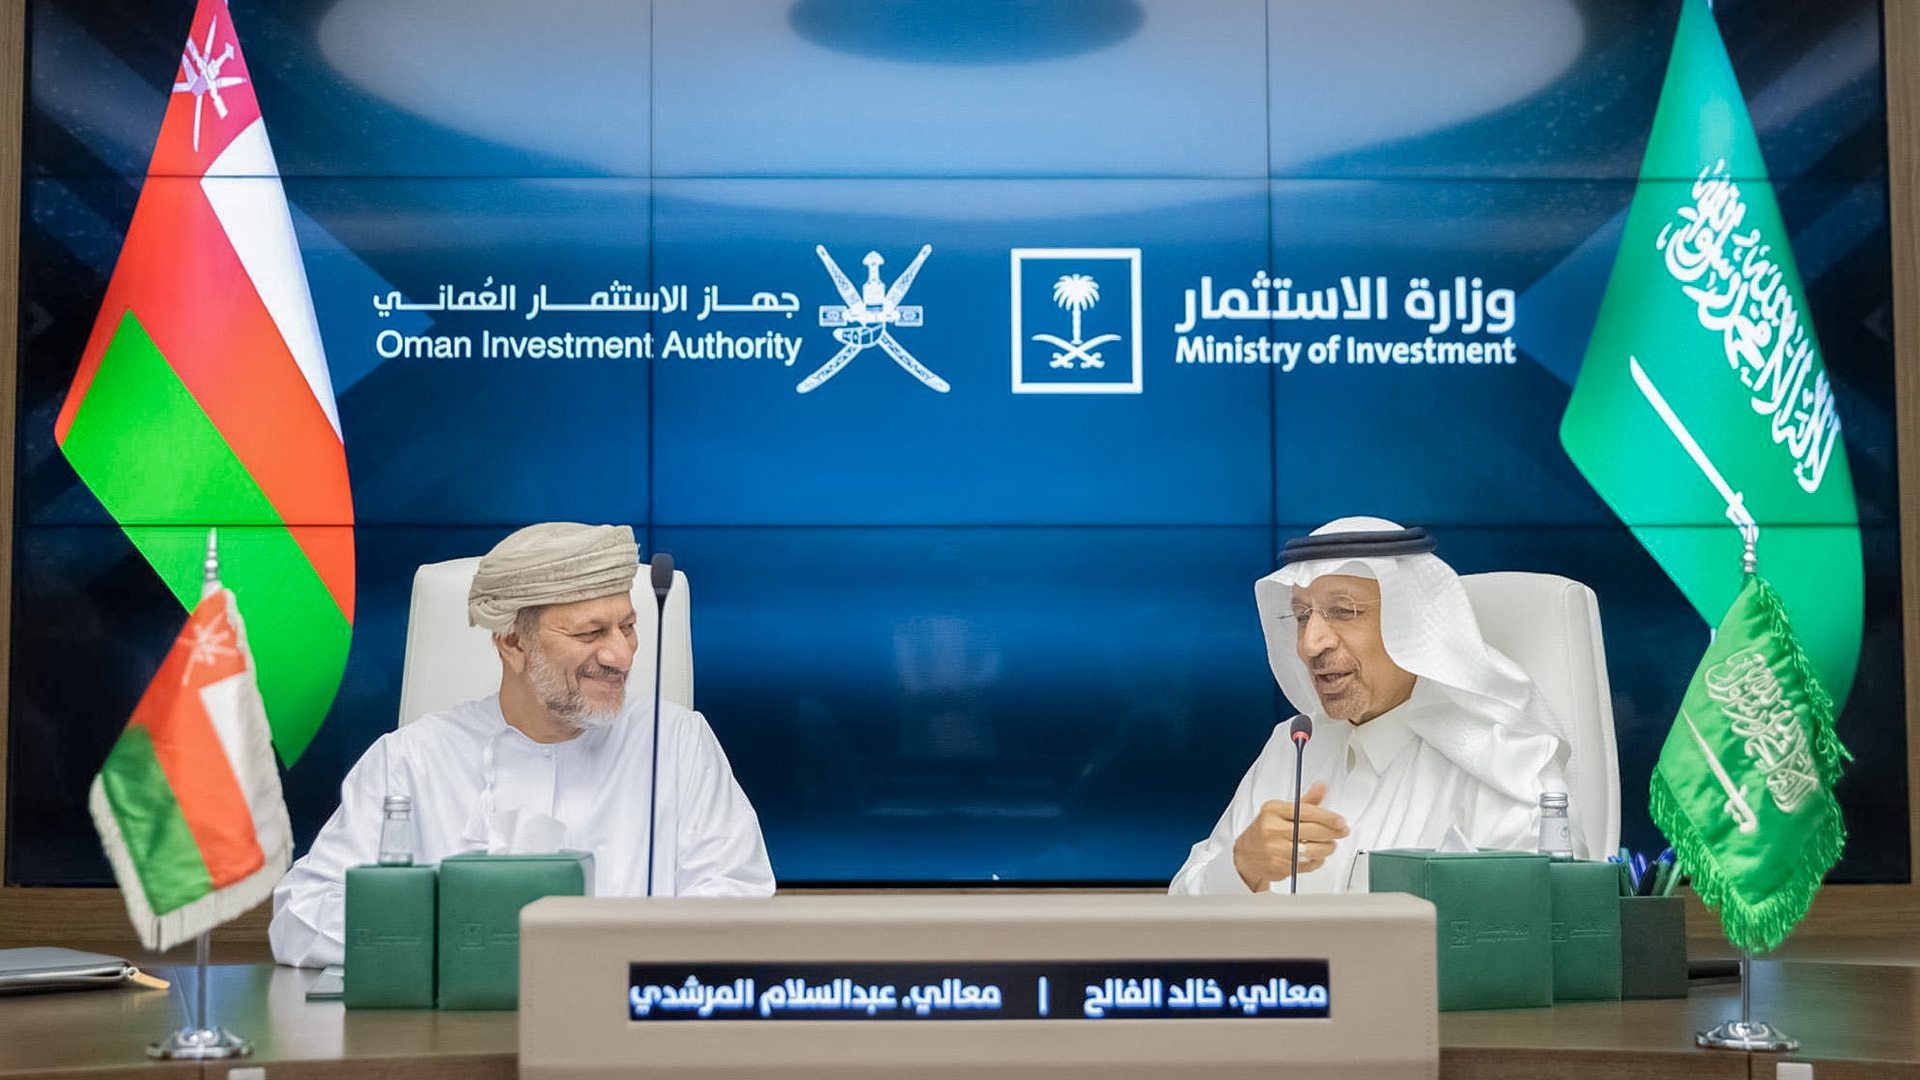 Saudi Minister of Investment meets with Oman Investment Authority President